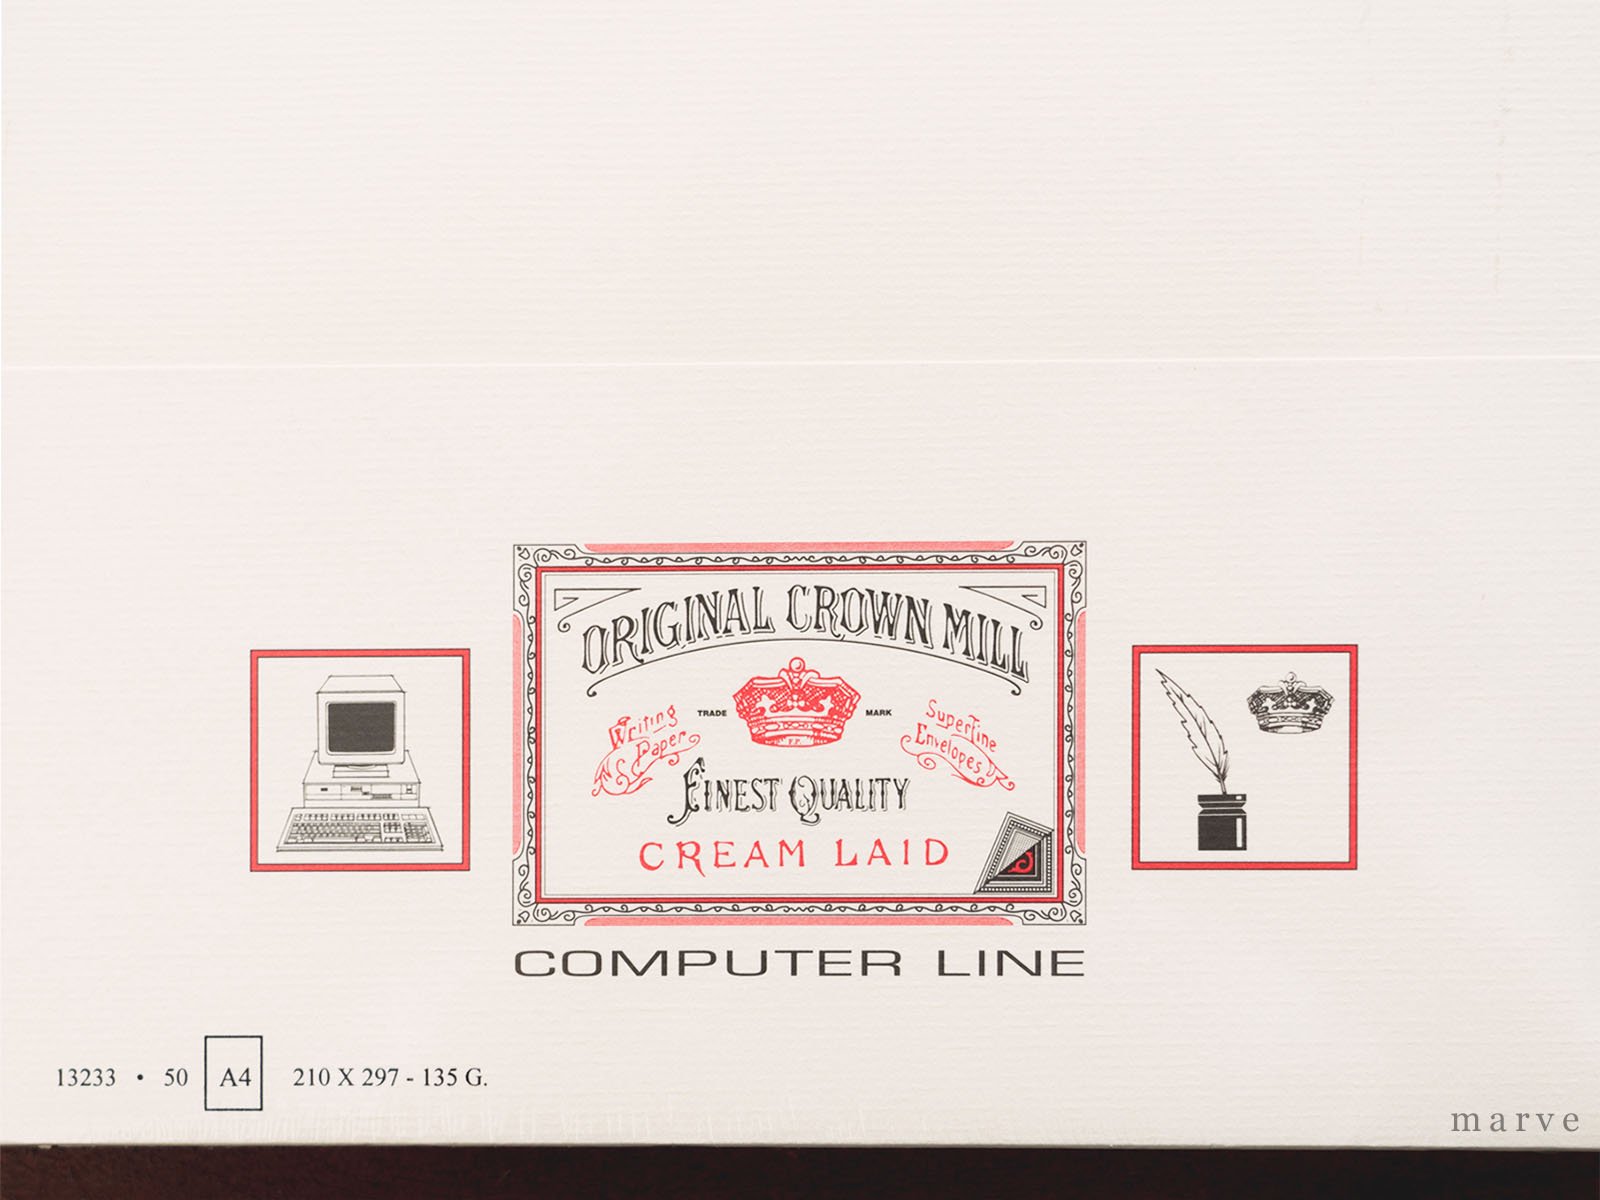 ORIGINAL CROWN MILL　コンピューターラインA4（50枚入）135gクリーム<img class='new_mark_img2' src='https://img.shop-pro.jp/img/new/icons1.gif' style='border:none;display:inline;margin:0px;padding:0px;width:auto;' />